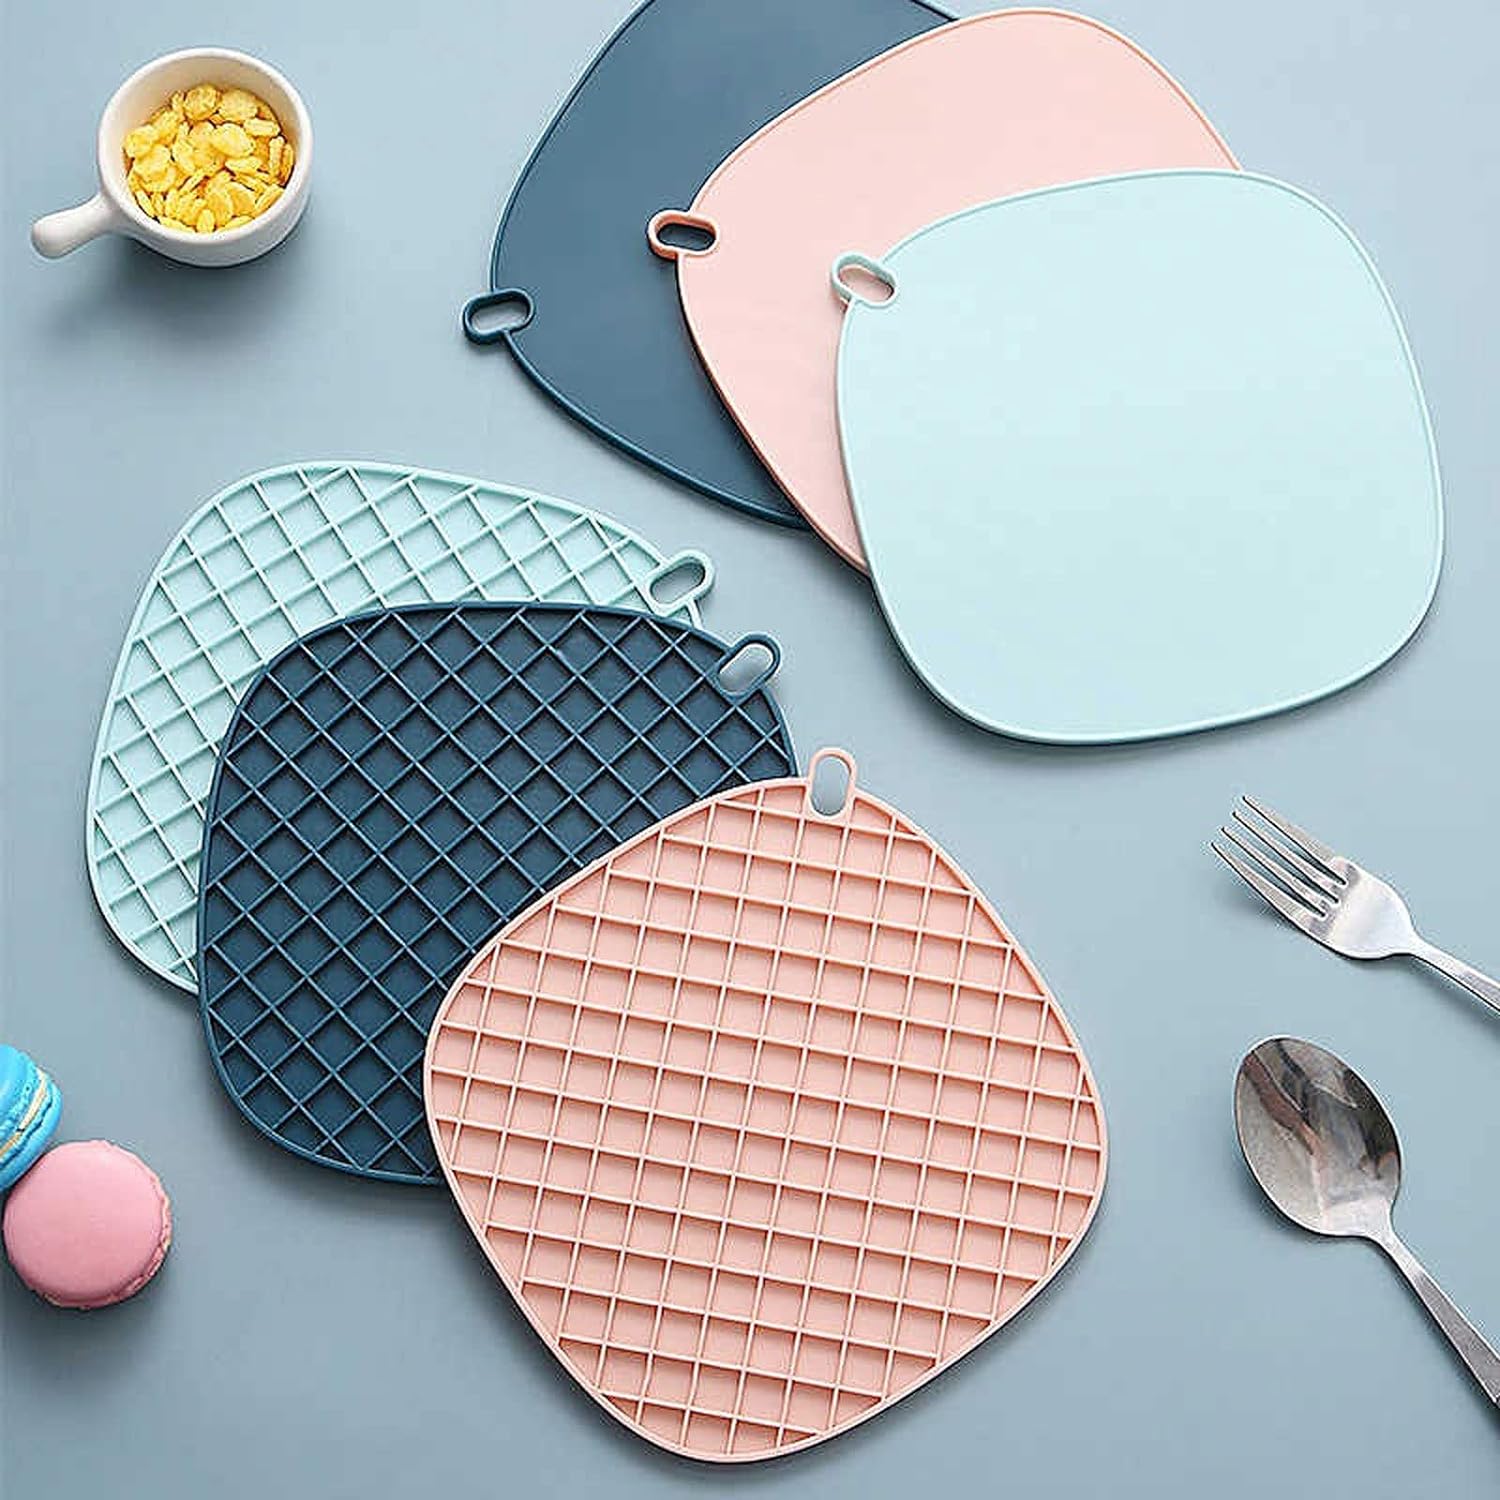 Heat resistant silicone coasters, multi-function mat for drinking cups.